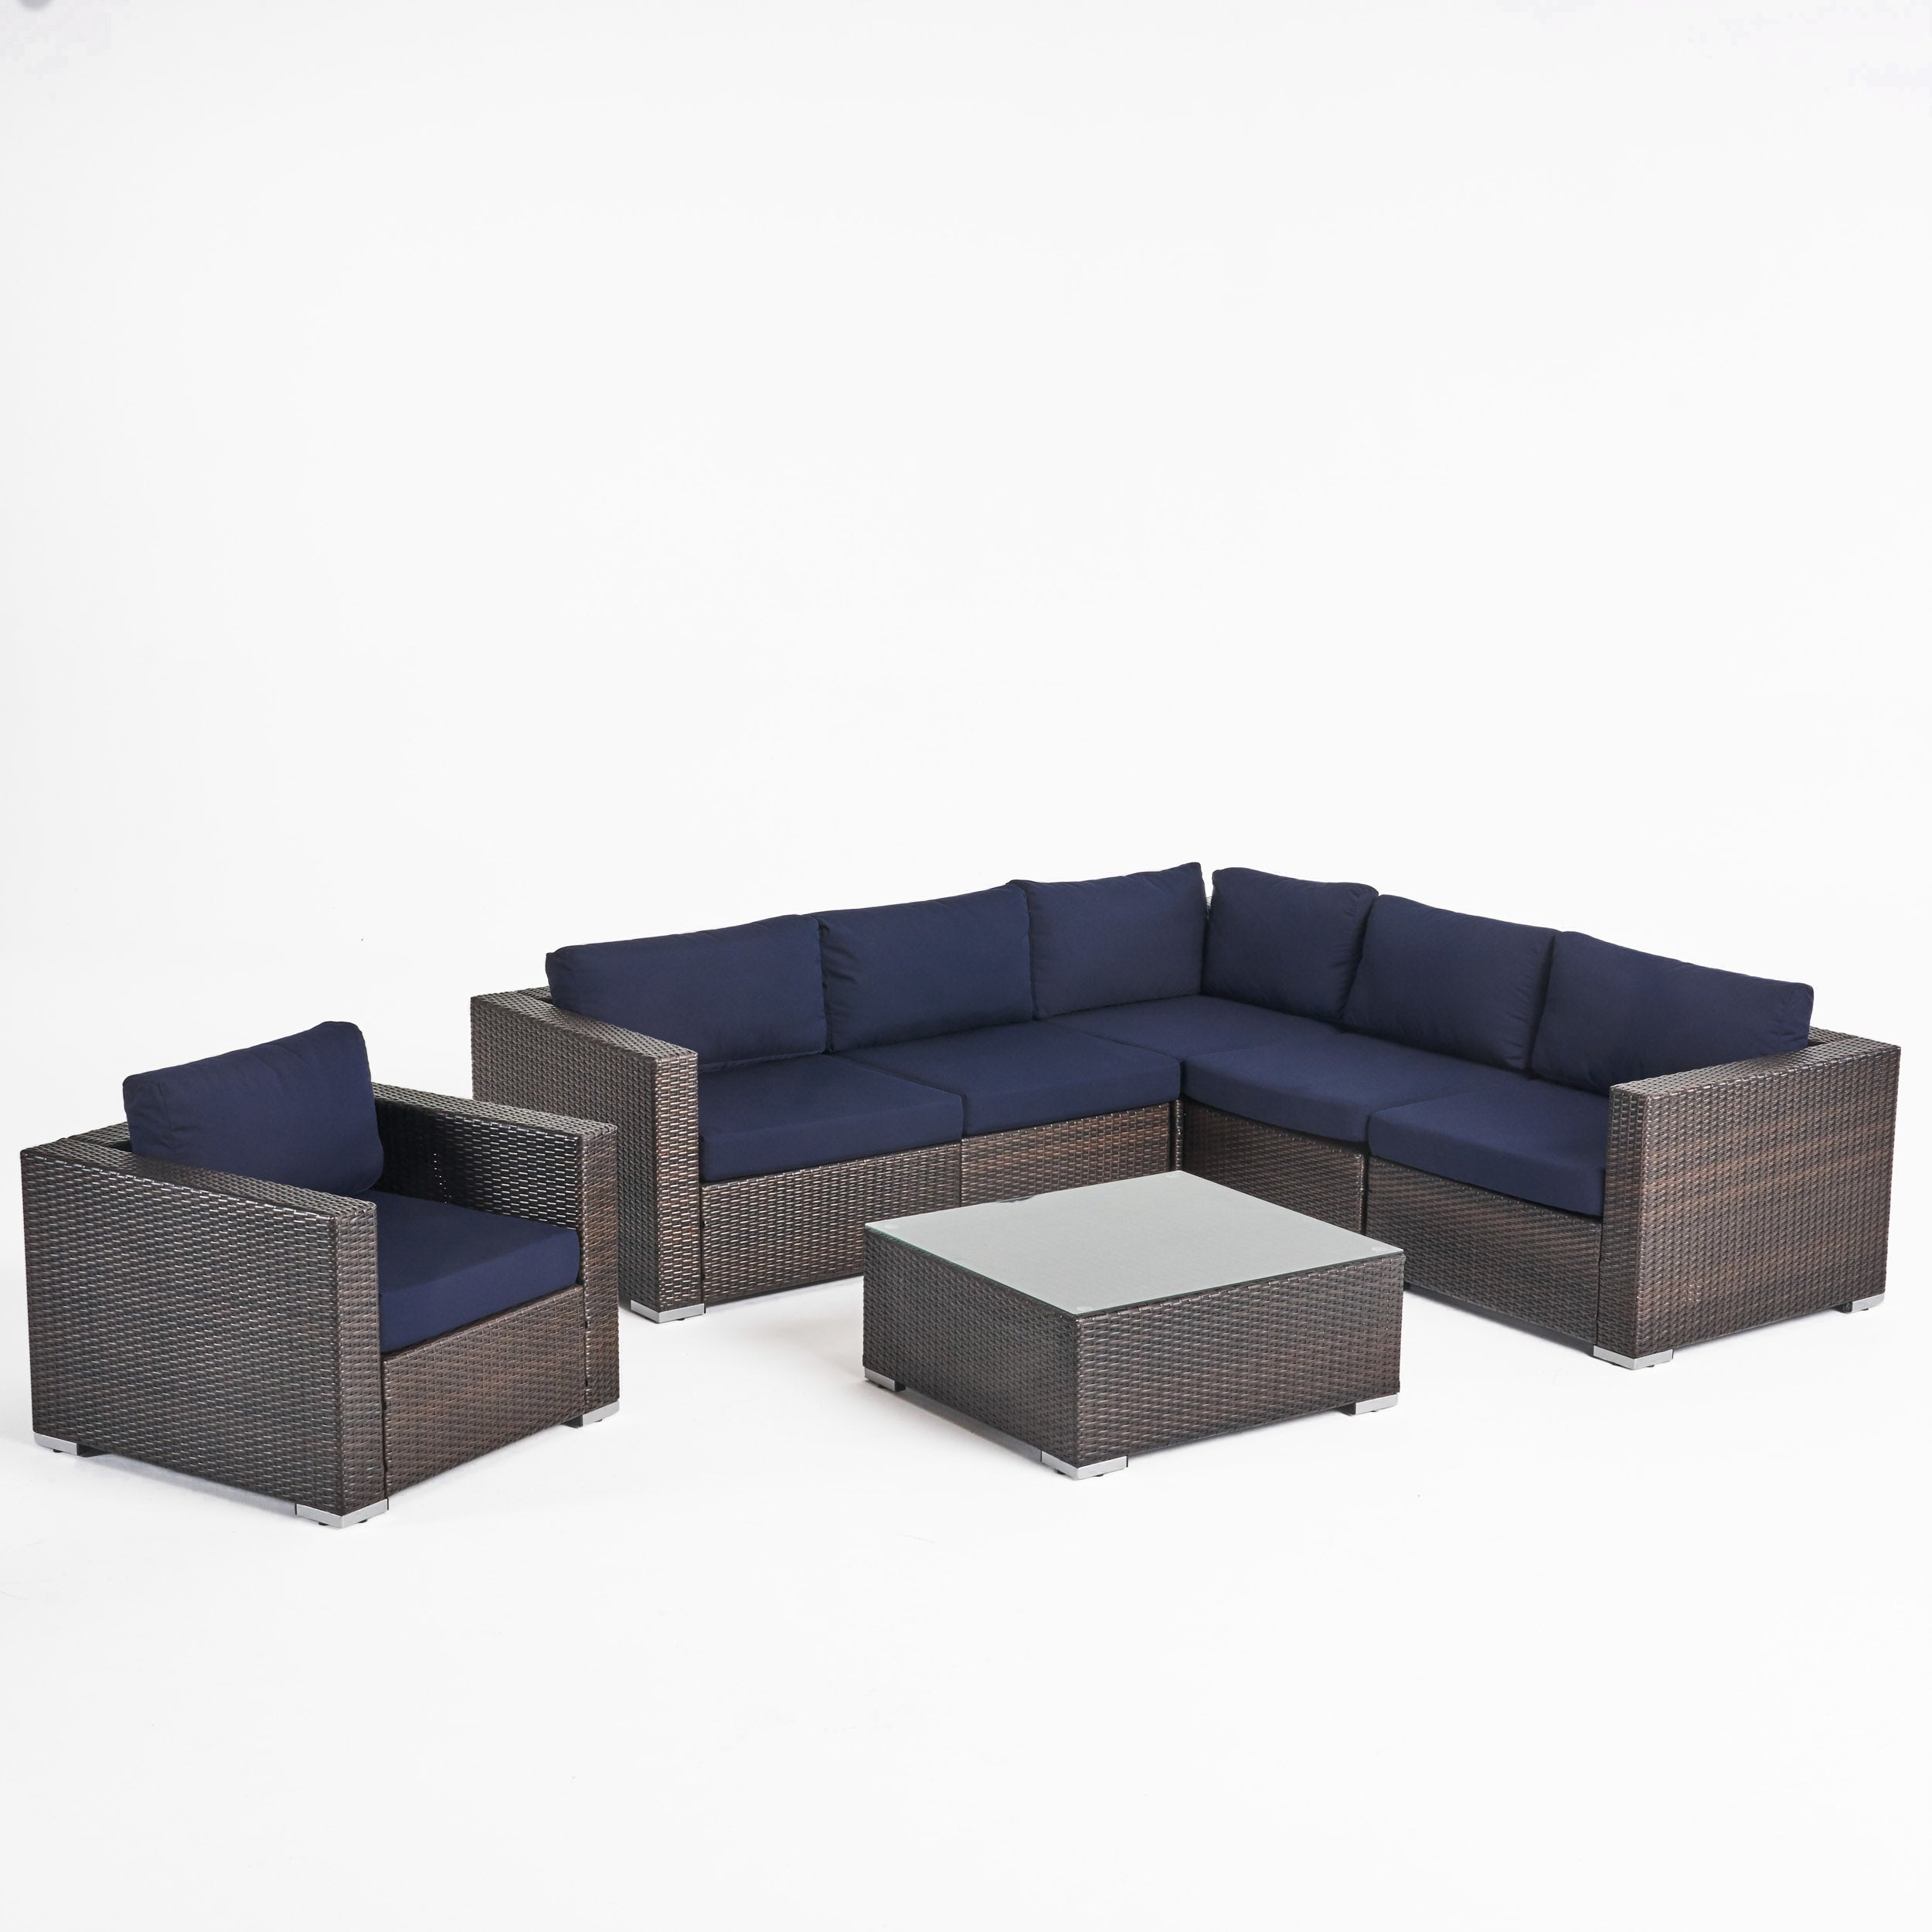 Kyra Outdoor 6 Seater Wicker Sectional Sofa Set with Sunbrella Cushions Multibrown Canvas Navy